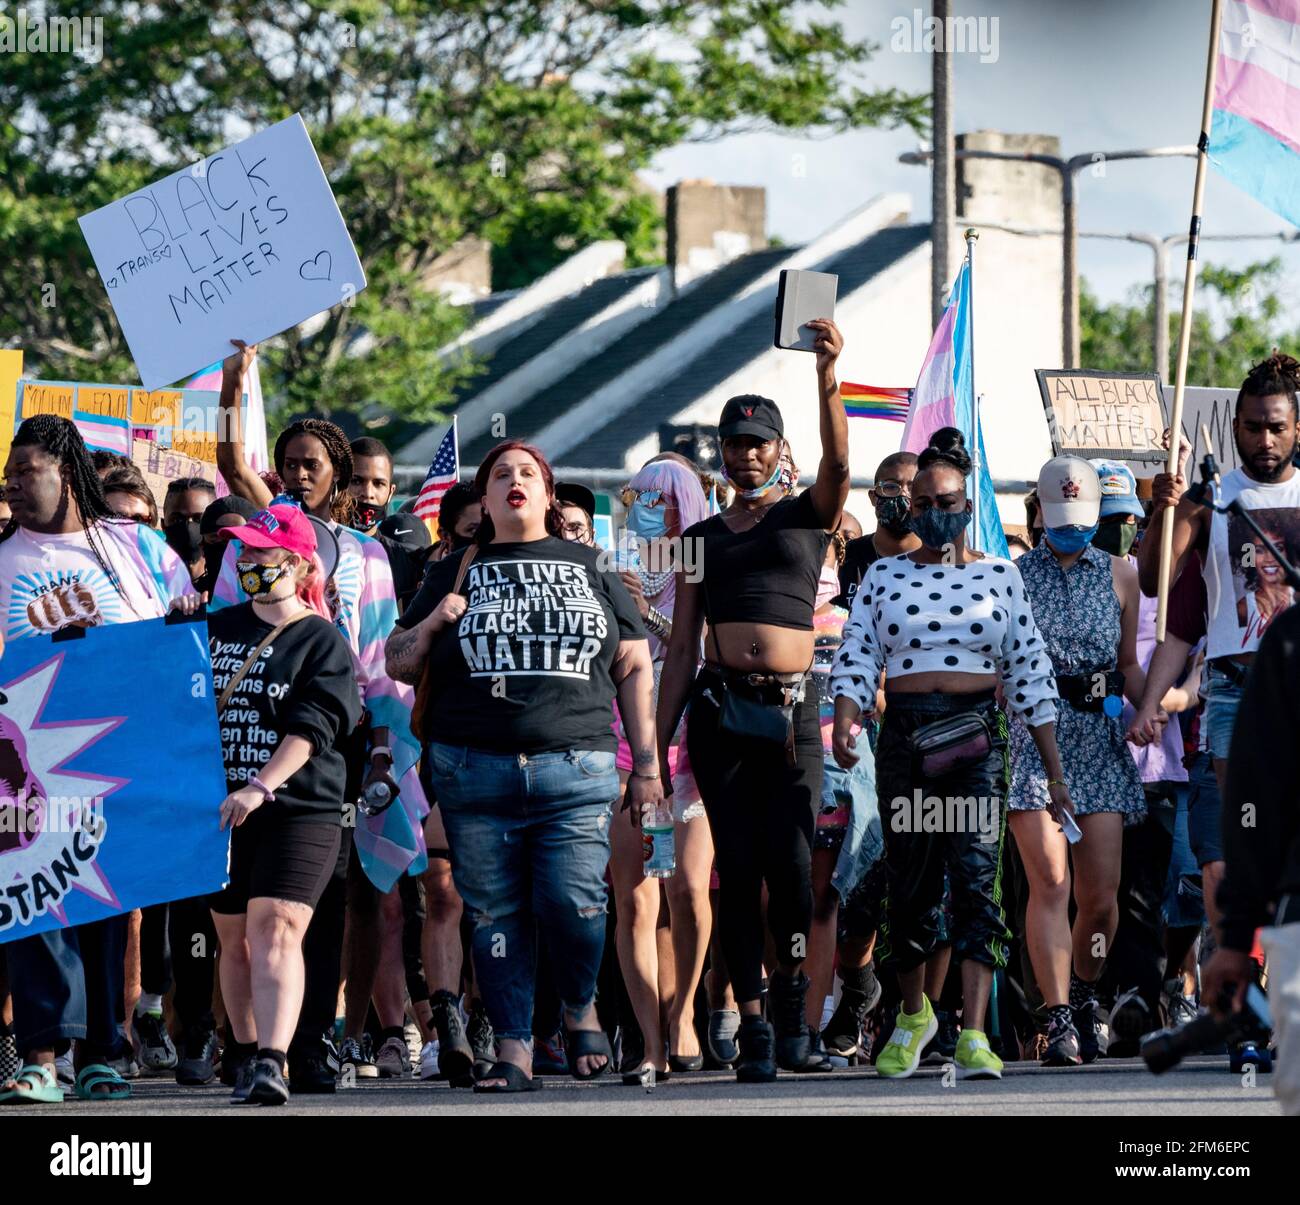 June 13, 2020, Boston, Massachusetts, USA:Transgender activist Jahaira DeAlto (wearing All lives can't matter until black lives matter T-shirt) marches for Black Trans Lives Matter rally in Boston on June 13, 2020. DeAlto died after being stabbed at Boston home on May 2, 2021 in Boston on May 3, 2021, while hosting Marcus Chavis and his family when Chavis killed her and his wife, Fatima Yasin. Credit: Keiko Hiromi/AFLO/Alamy Live News Stock Photo